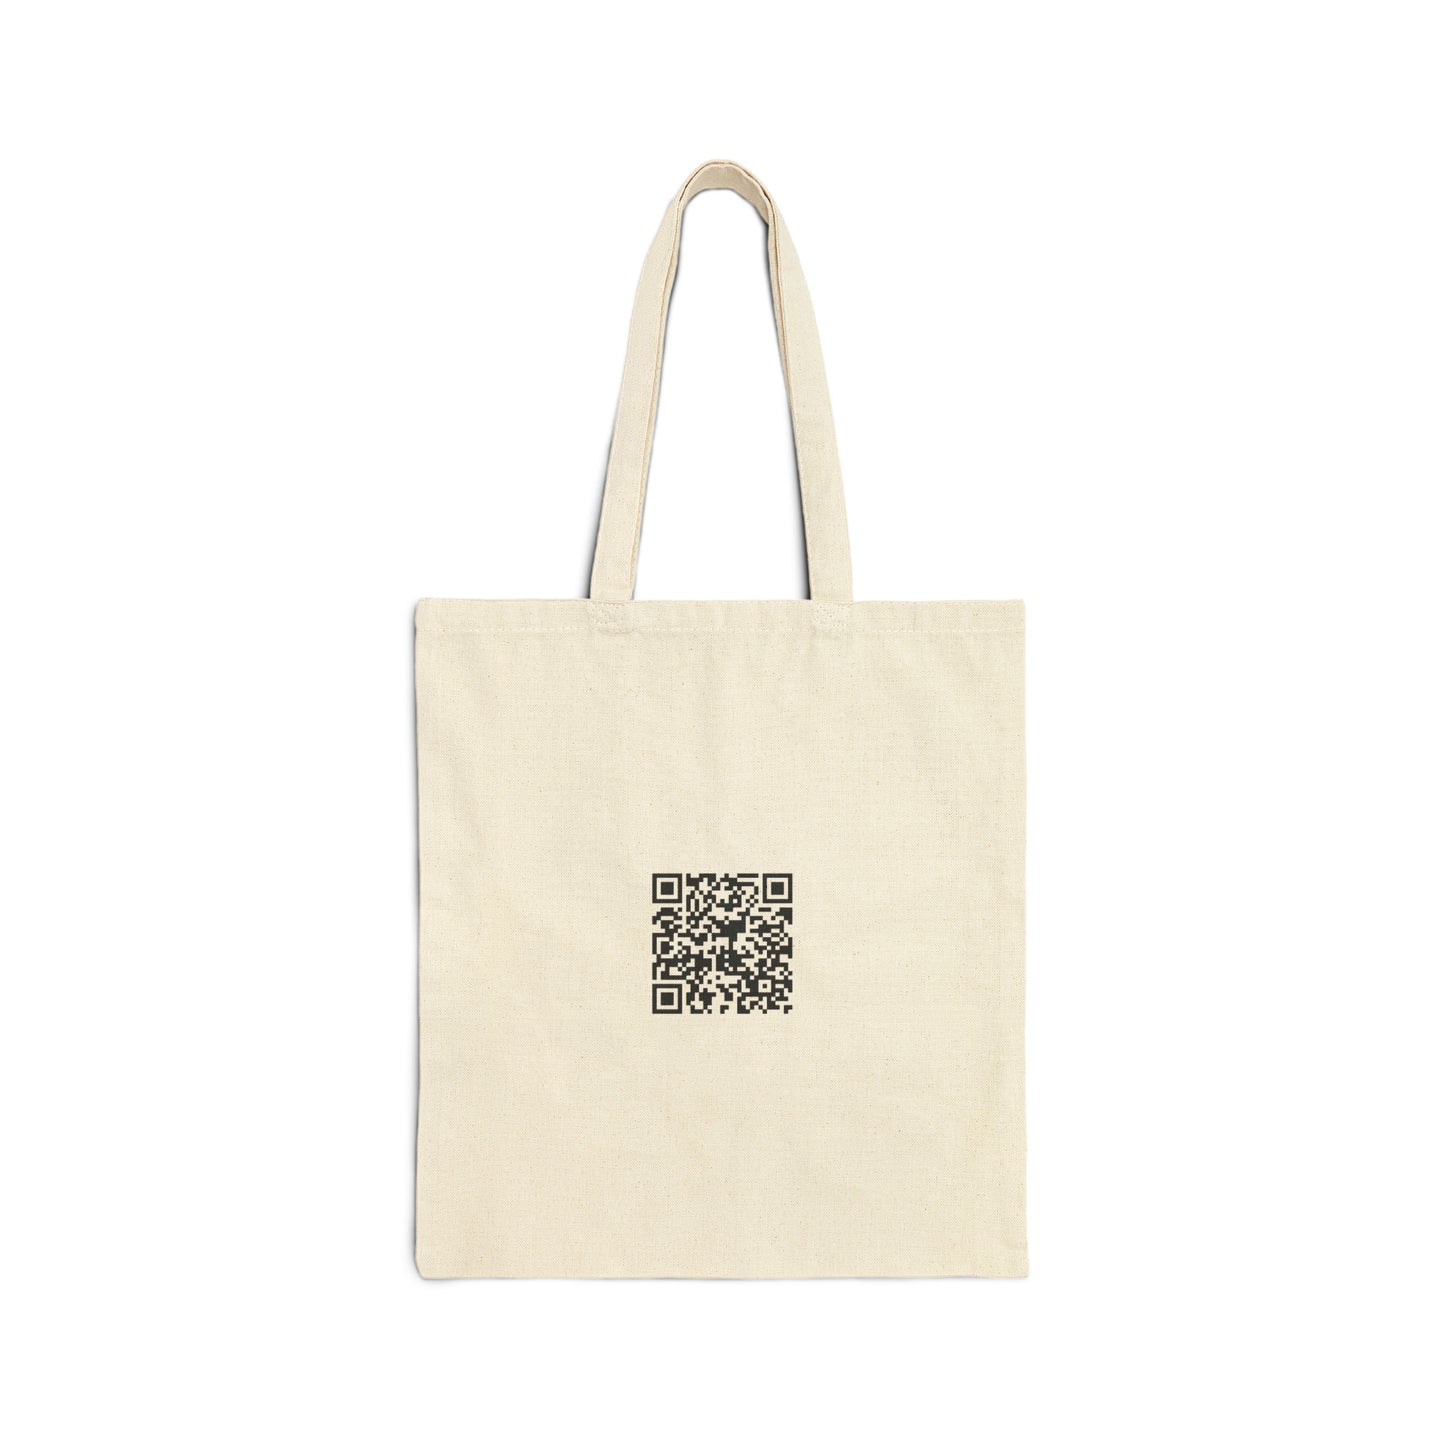 The Strangeness That Is Wales - Cotton Canvas Tote Bag